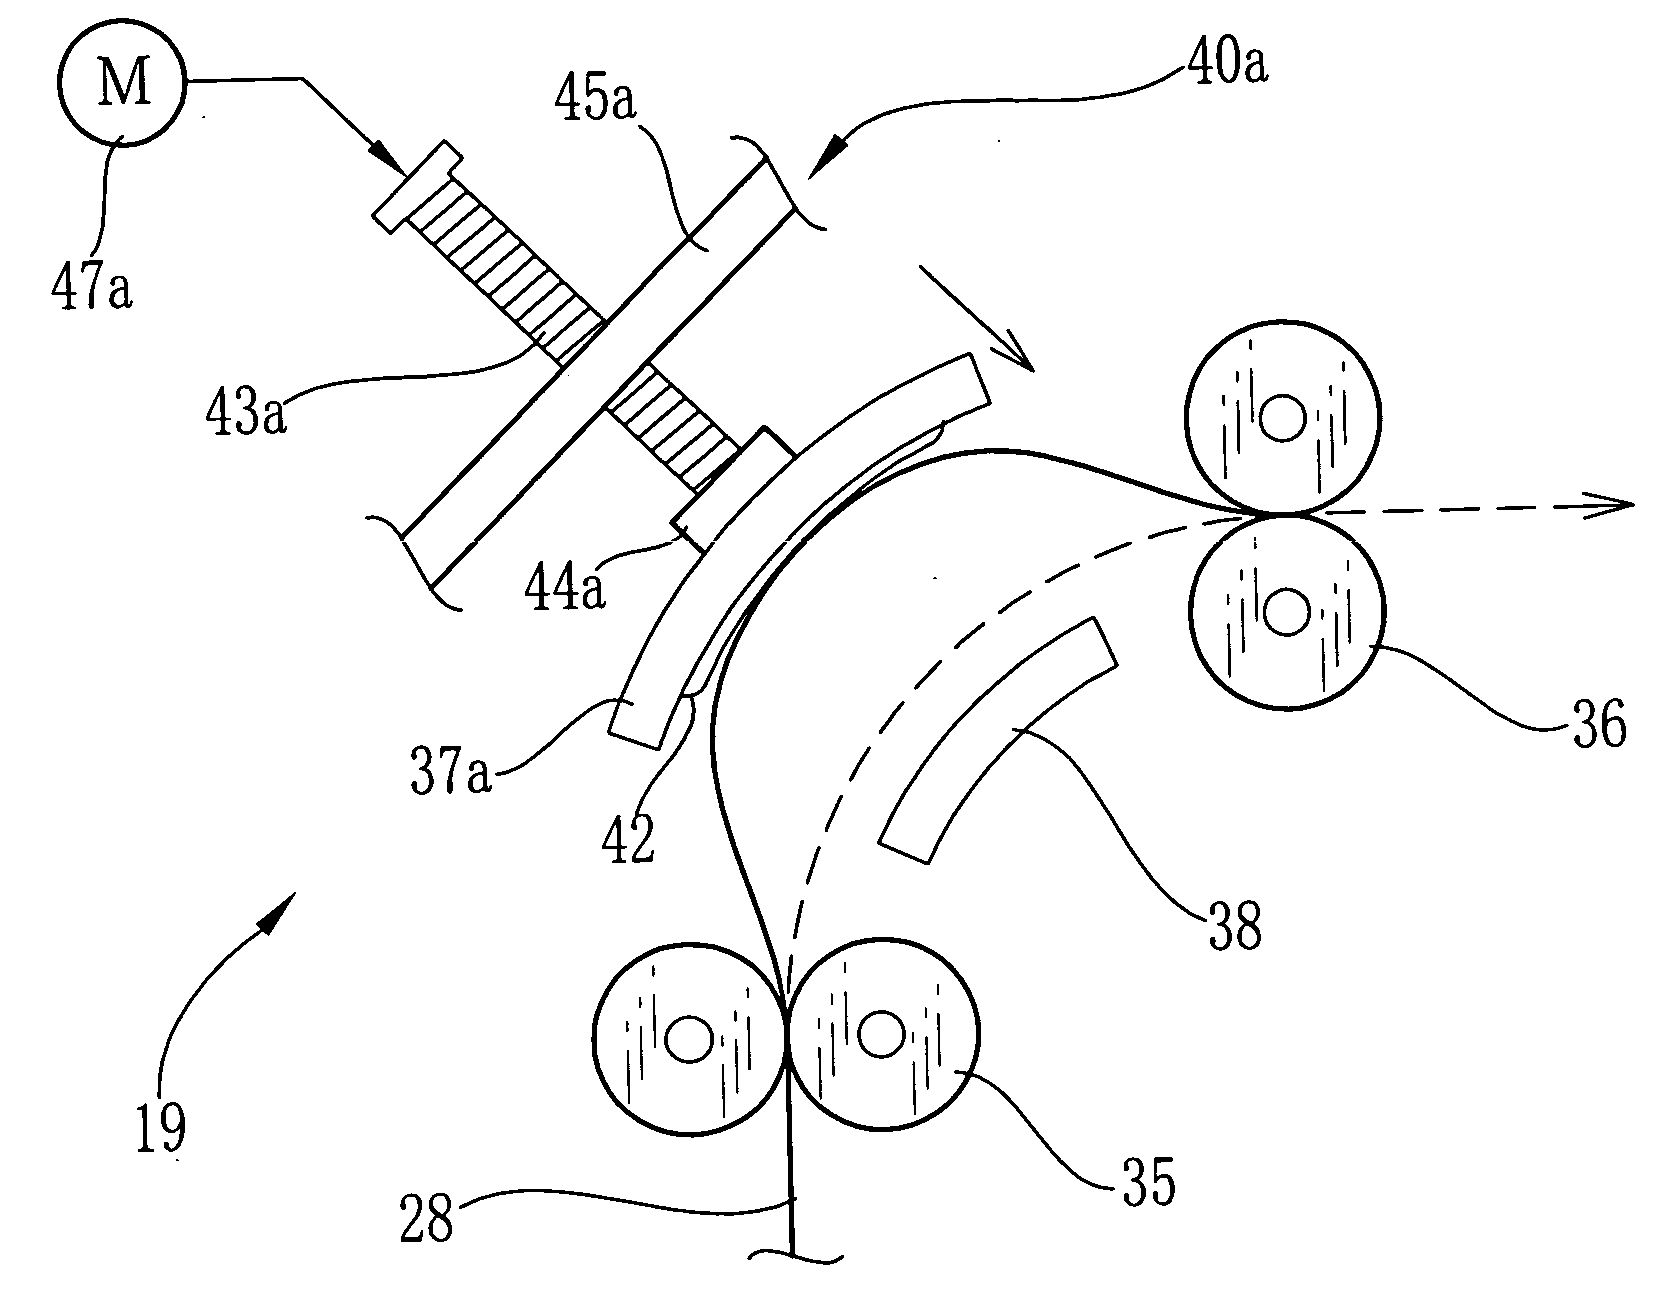 Feeding device for sheet material and image recording apparatus for recording an image thereon